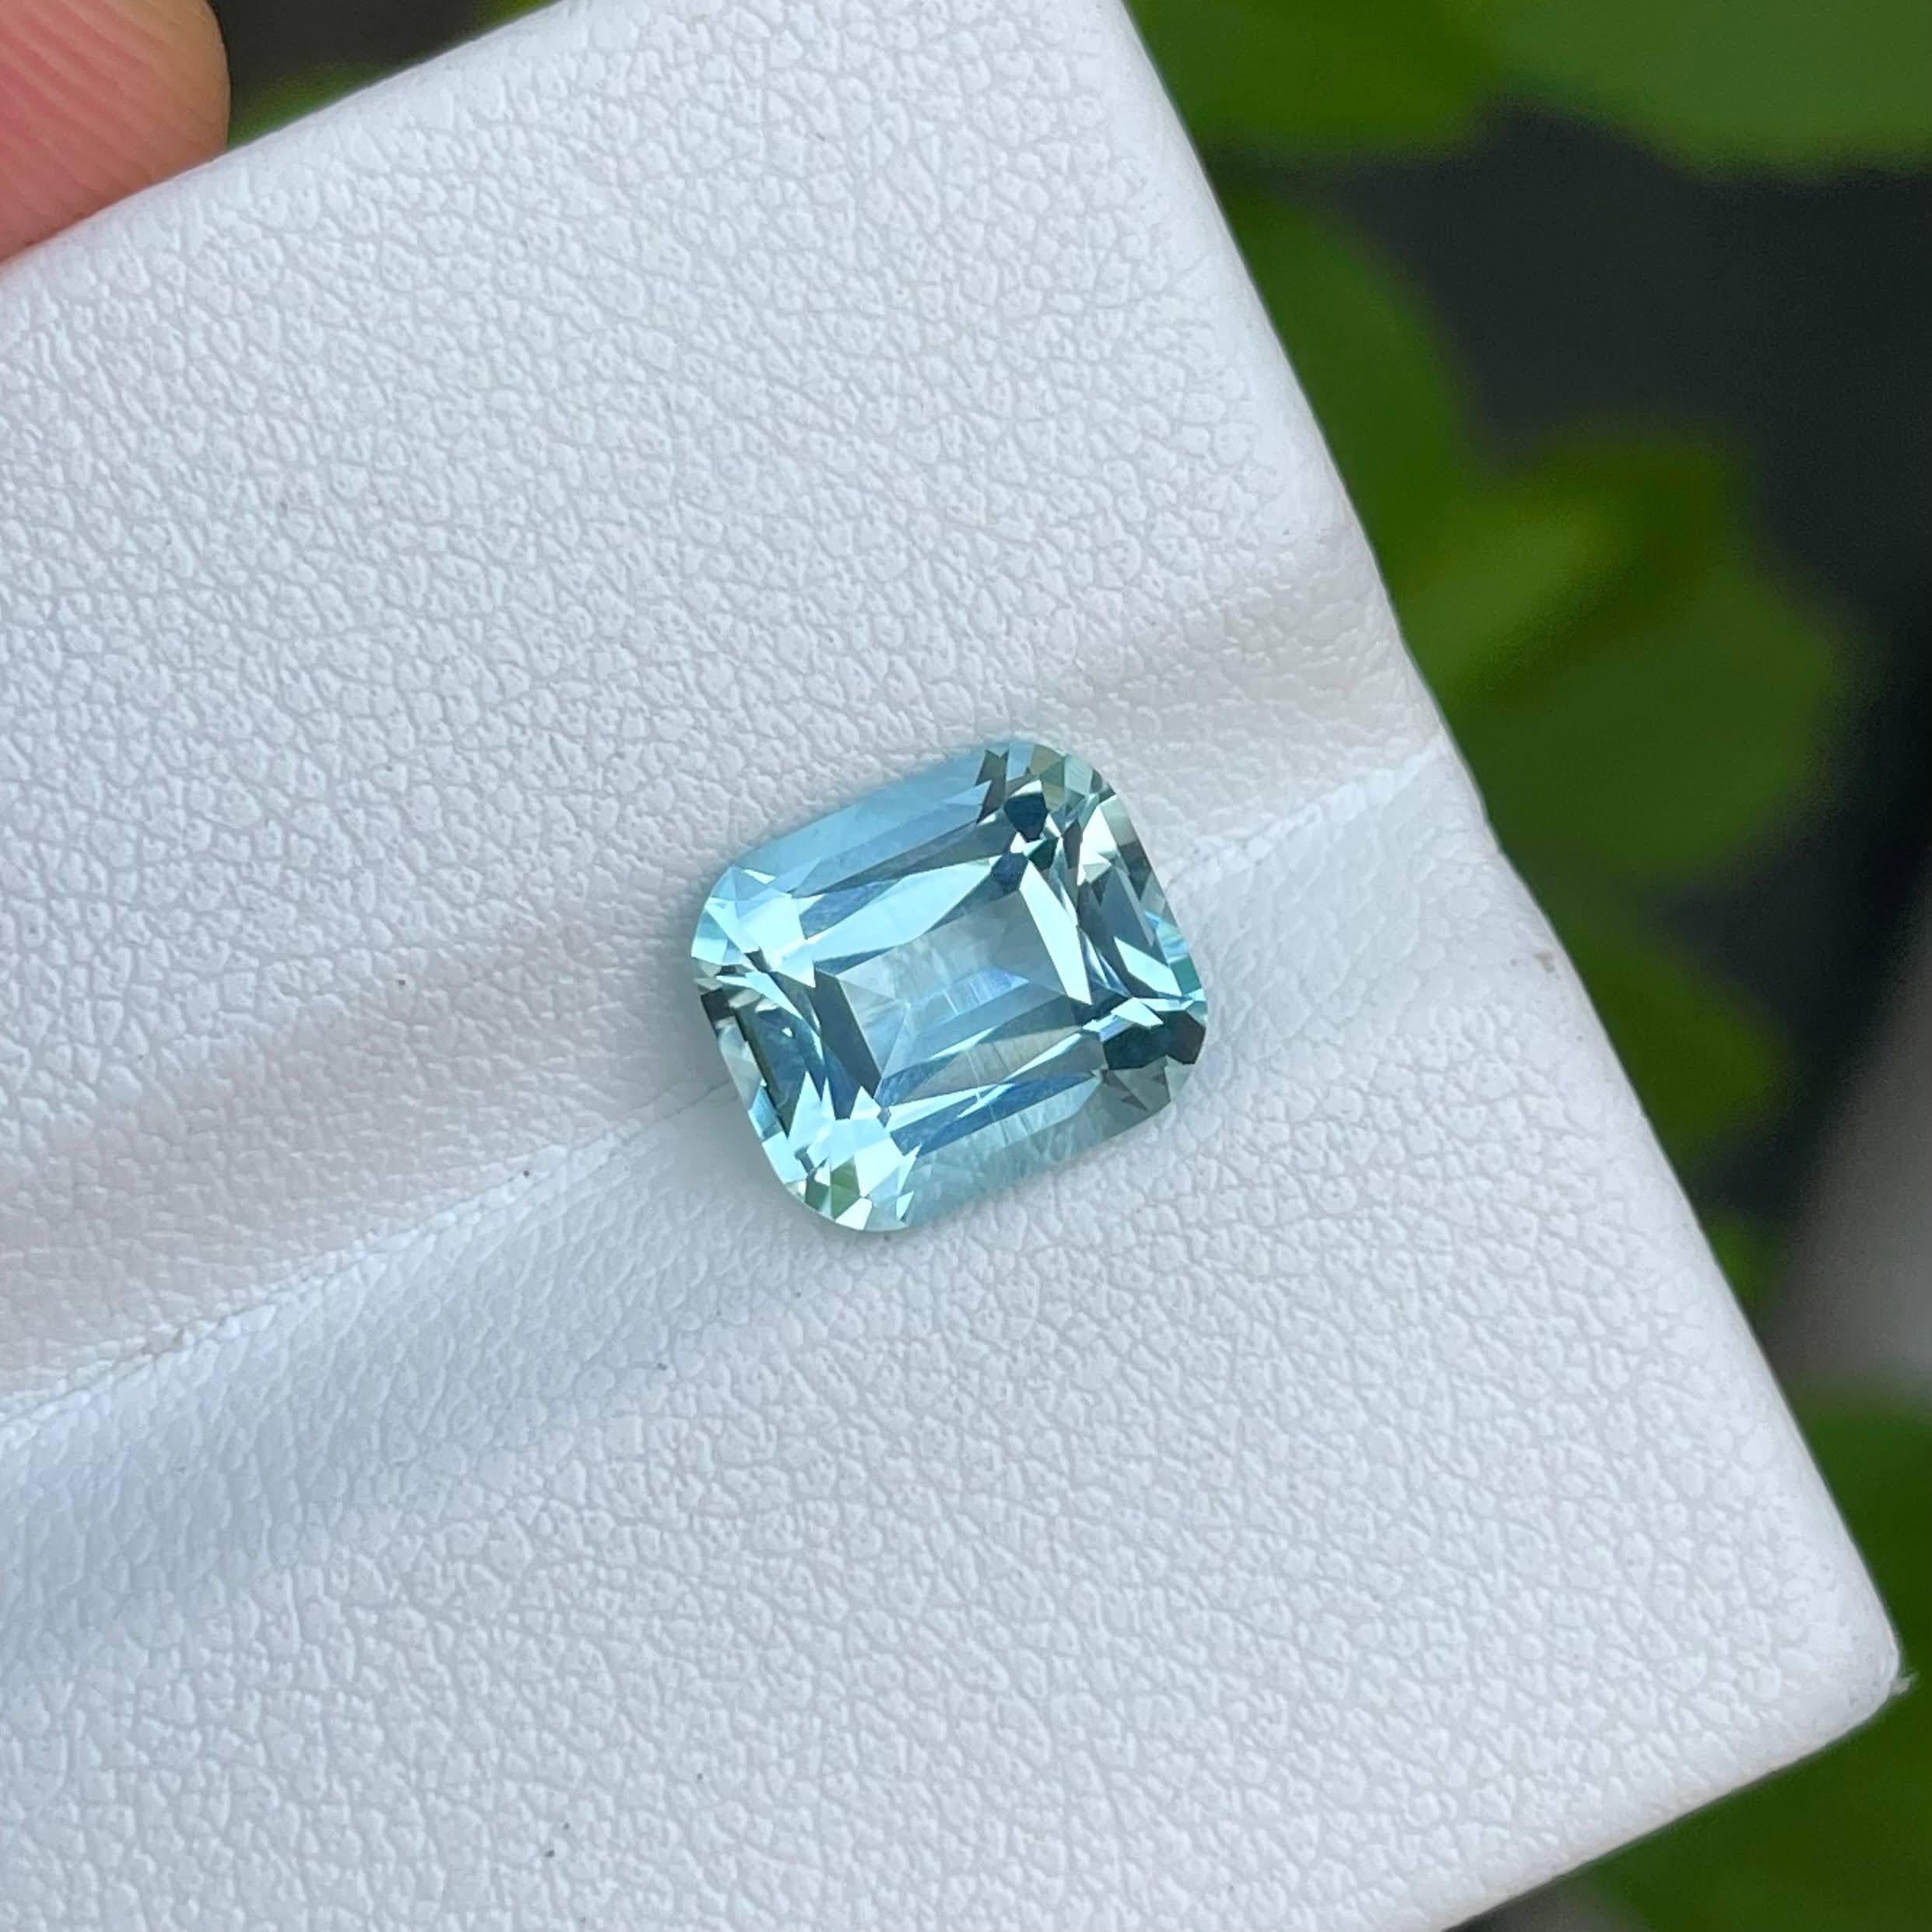 Weight 2.80 carats 
Dimensions 9.15x8.0x5.8 mm
Treatment none 
Origin Nigeria 
Clarity eye clean 
Shape cushion 
Cut fancy cushion





Behold the exquisite beauty of a 2.80-carat Sea Blue Aquamarine, skillfully crafted into a mesmerizing Cushion